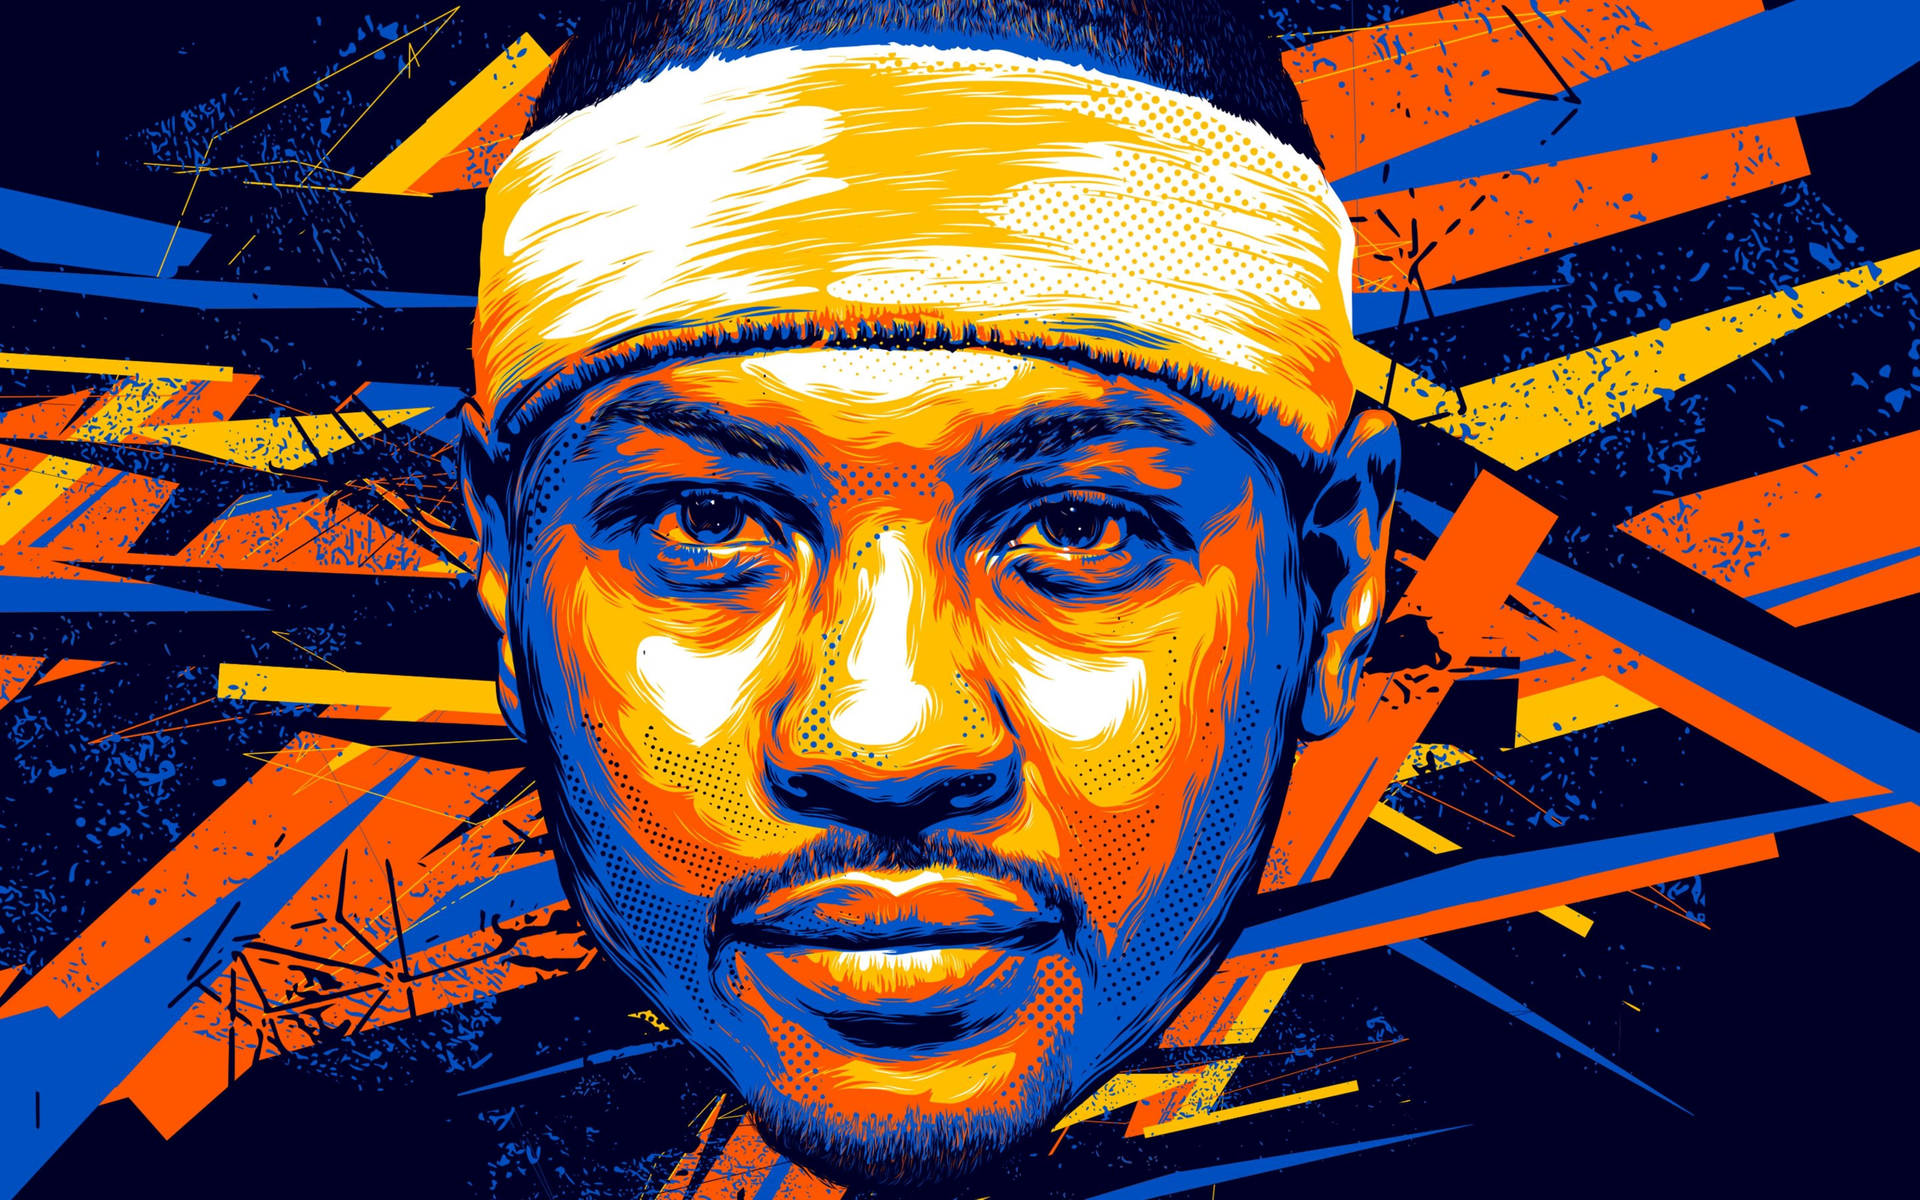 5120X3200 Carmelo Anthony Wallpaper and Background